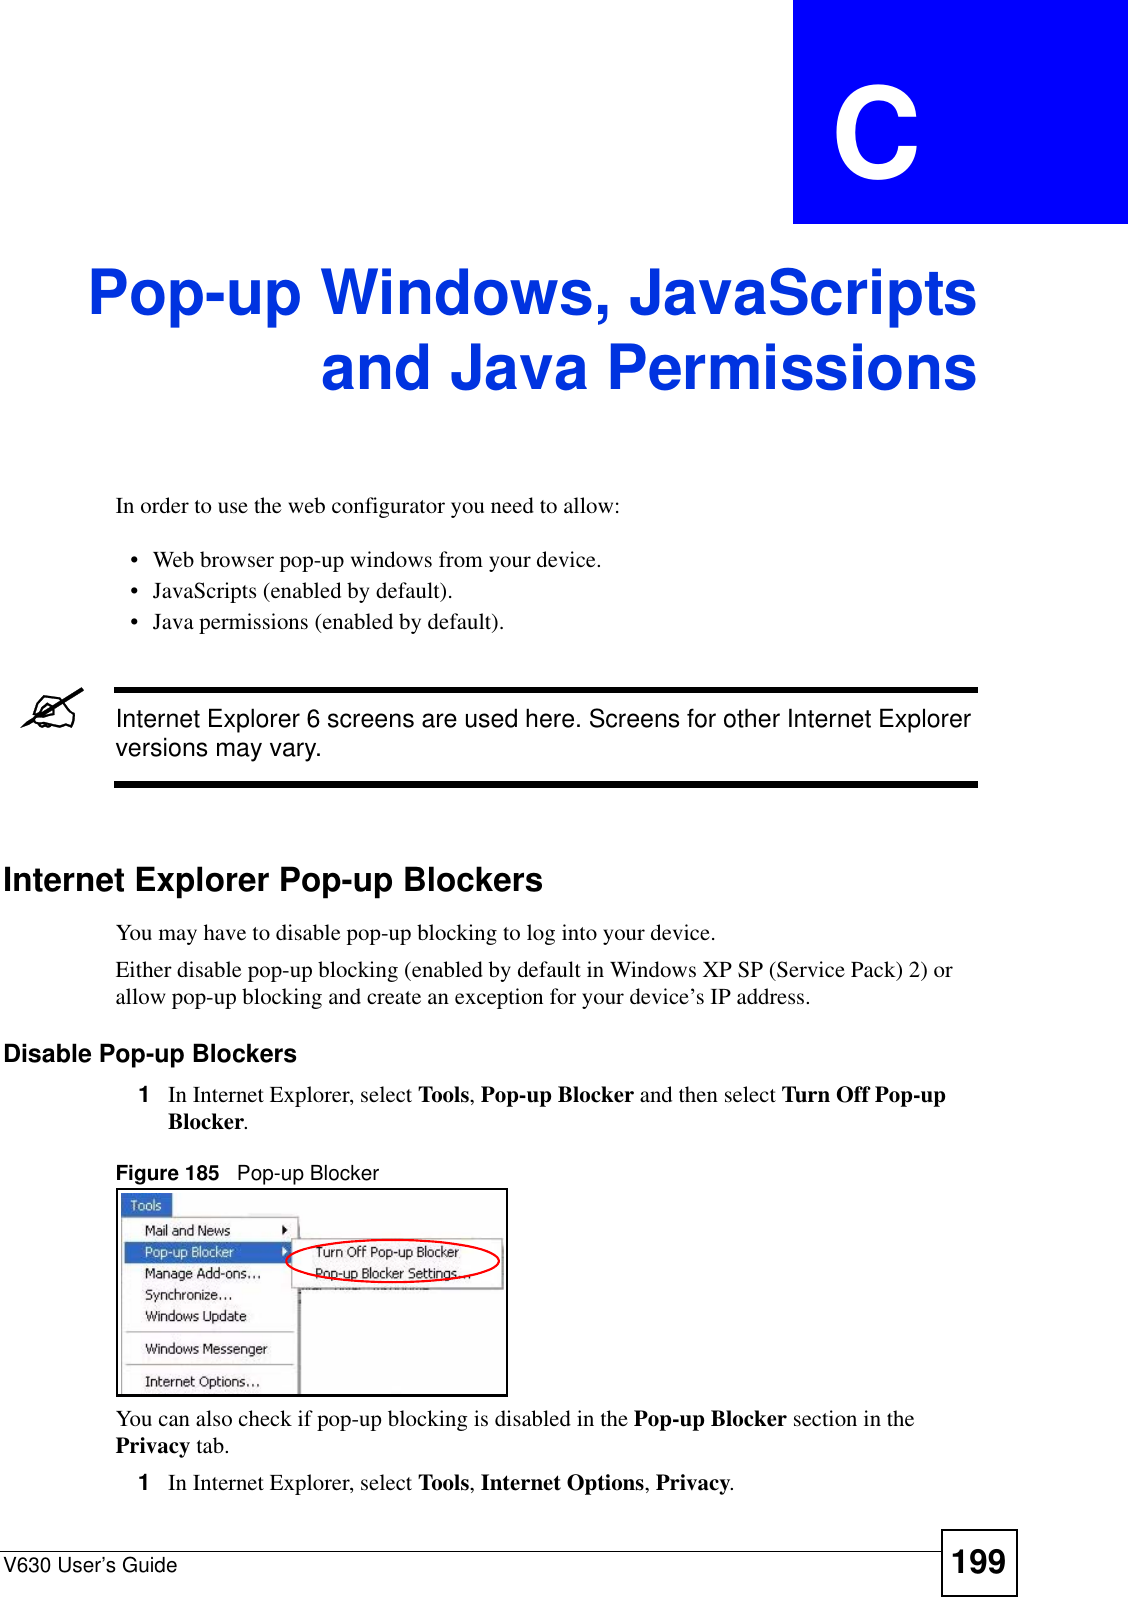 V630 User’s Guide 199APPENDIX  C Pop-up Windows, JavaScriptsand Java PermissionsIn order to use the web configurator you need to allow:• Web browser pop-up windows from your device.• JavaScripts (enabled by default).• Java permissions (enabled by default).&quot;Internet Explorer 6 screens are used here. Screens for other Internet Explorer versions may vary.Internet Explorer Pop-up BlockersYou may have to disable pop-up blocking to log into your device. Either disable pop-up blocking (enabled by default in Windows XP SP (Service Pack) 2) or allow pop-up blocking and create an exception for your device’s IP address.Disable Pop-up Blockers1In Internet Explorer, select Tools, Pop-up Blocker and then select Turn Off Pop-up Blocker. Figure 185   Pop-up BlockerYou can also check if pop-up blocking is disabled in the Pop-up Blocker section in the Privacy tab. 1In Internet Explorer, select Tools, Internet Options, Privacy.